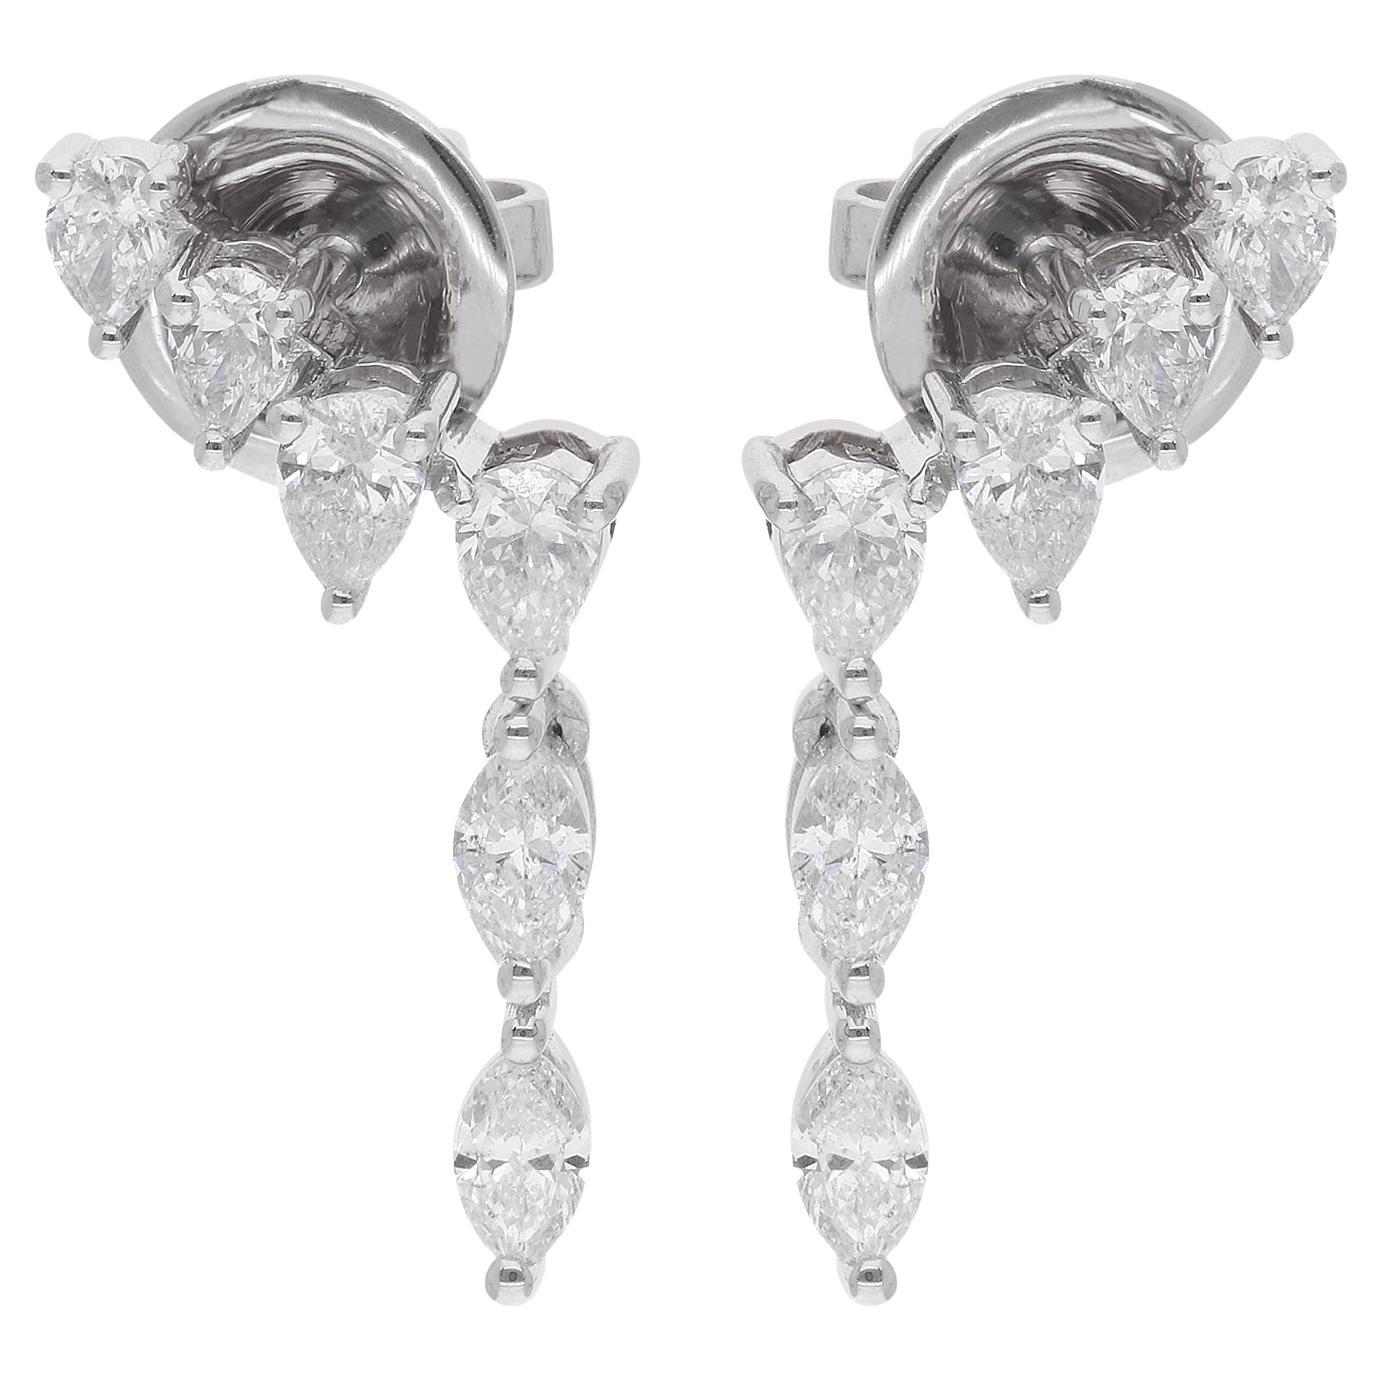 Earrings featuring 0.90 carat pear and marquise diamonds in 14 karat white gold are a beautiful and elegant piece of handmade fine jewelry. Each earring showcases a combination of pear-shaped and marquise-shaped diamonds.

The pear-shaped diamond is